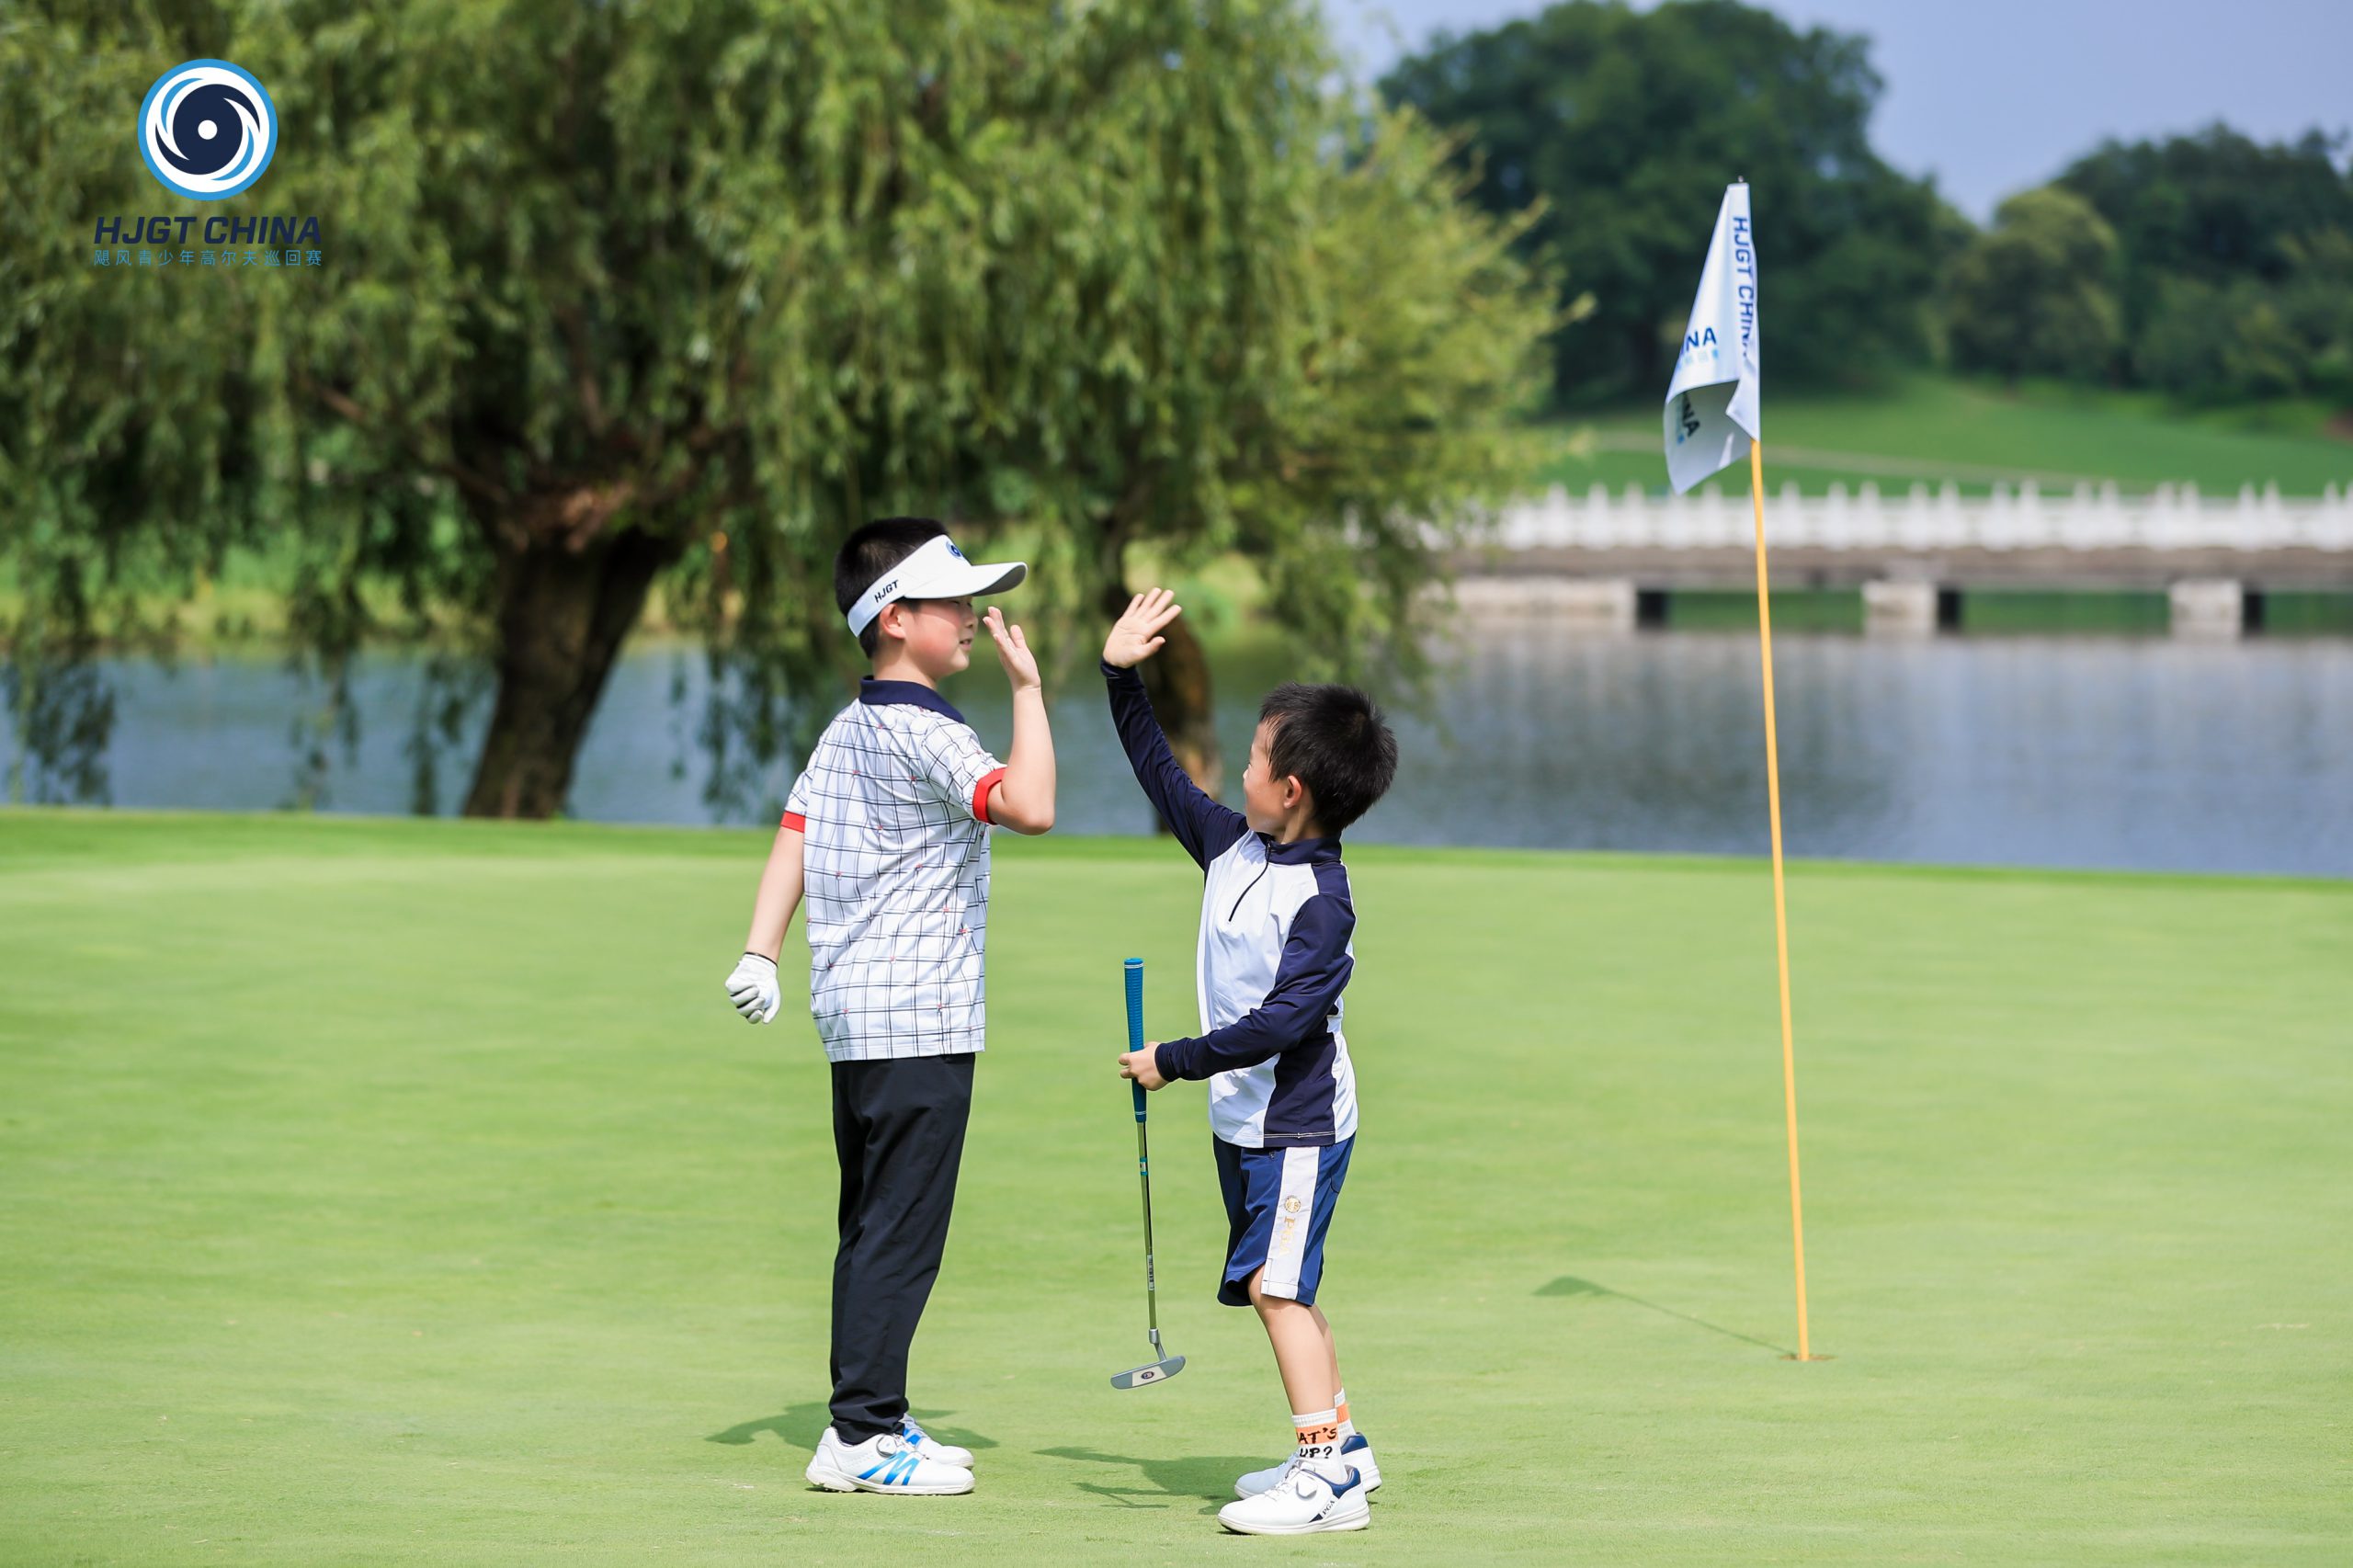 HJGT China Debuts in 3 Cities